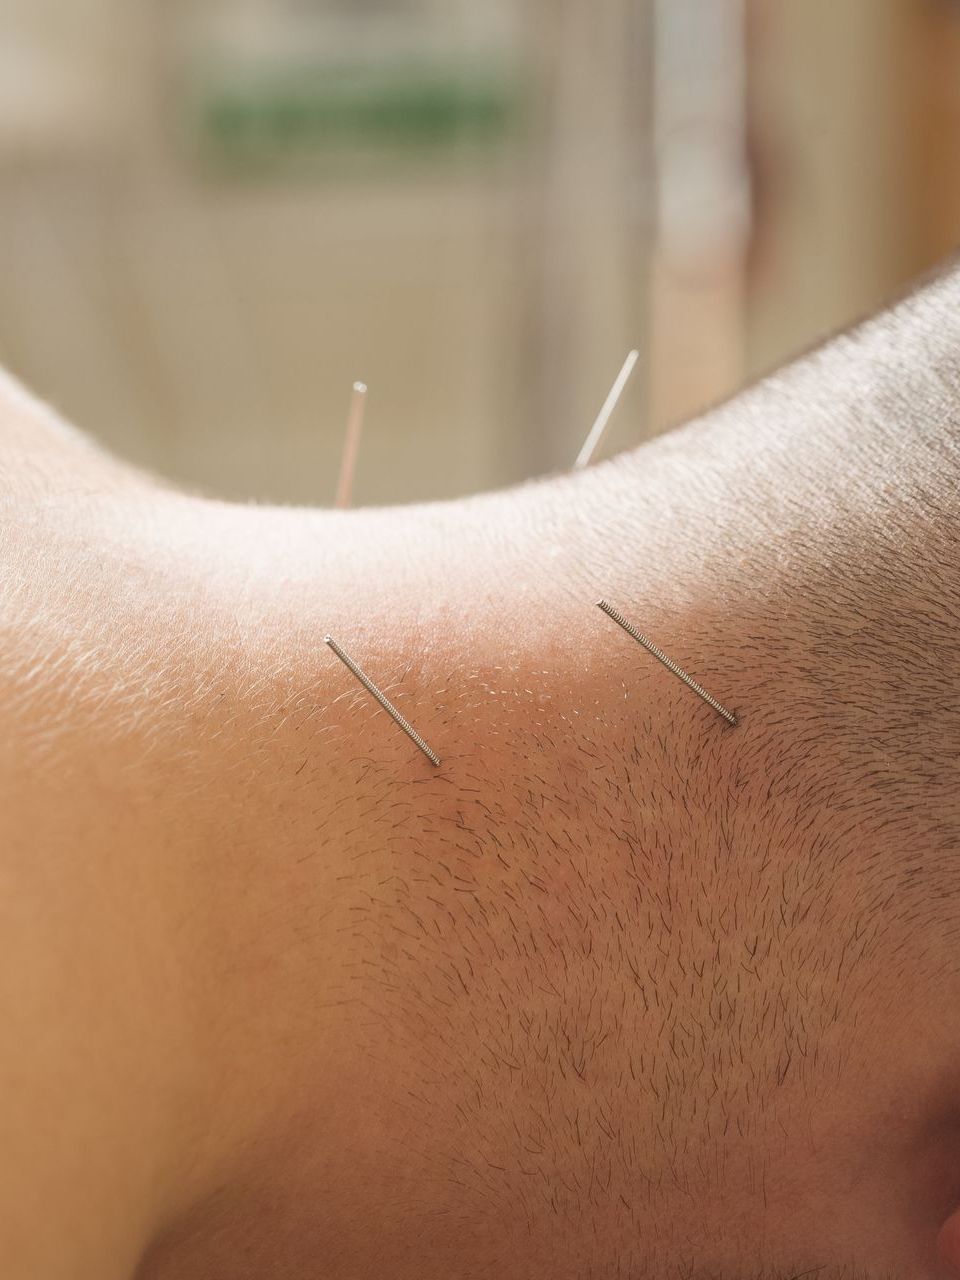 medical acupuncture session